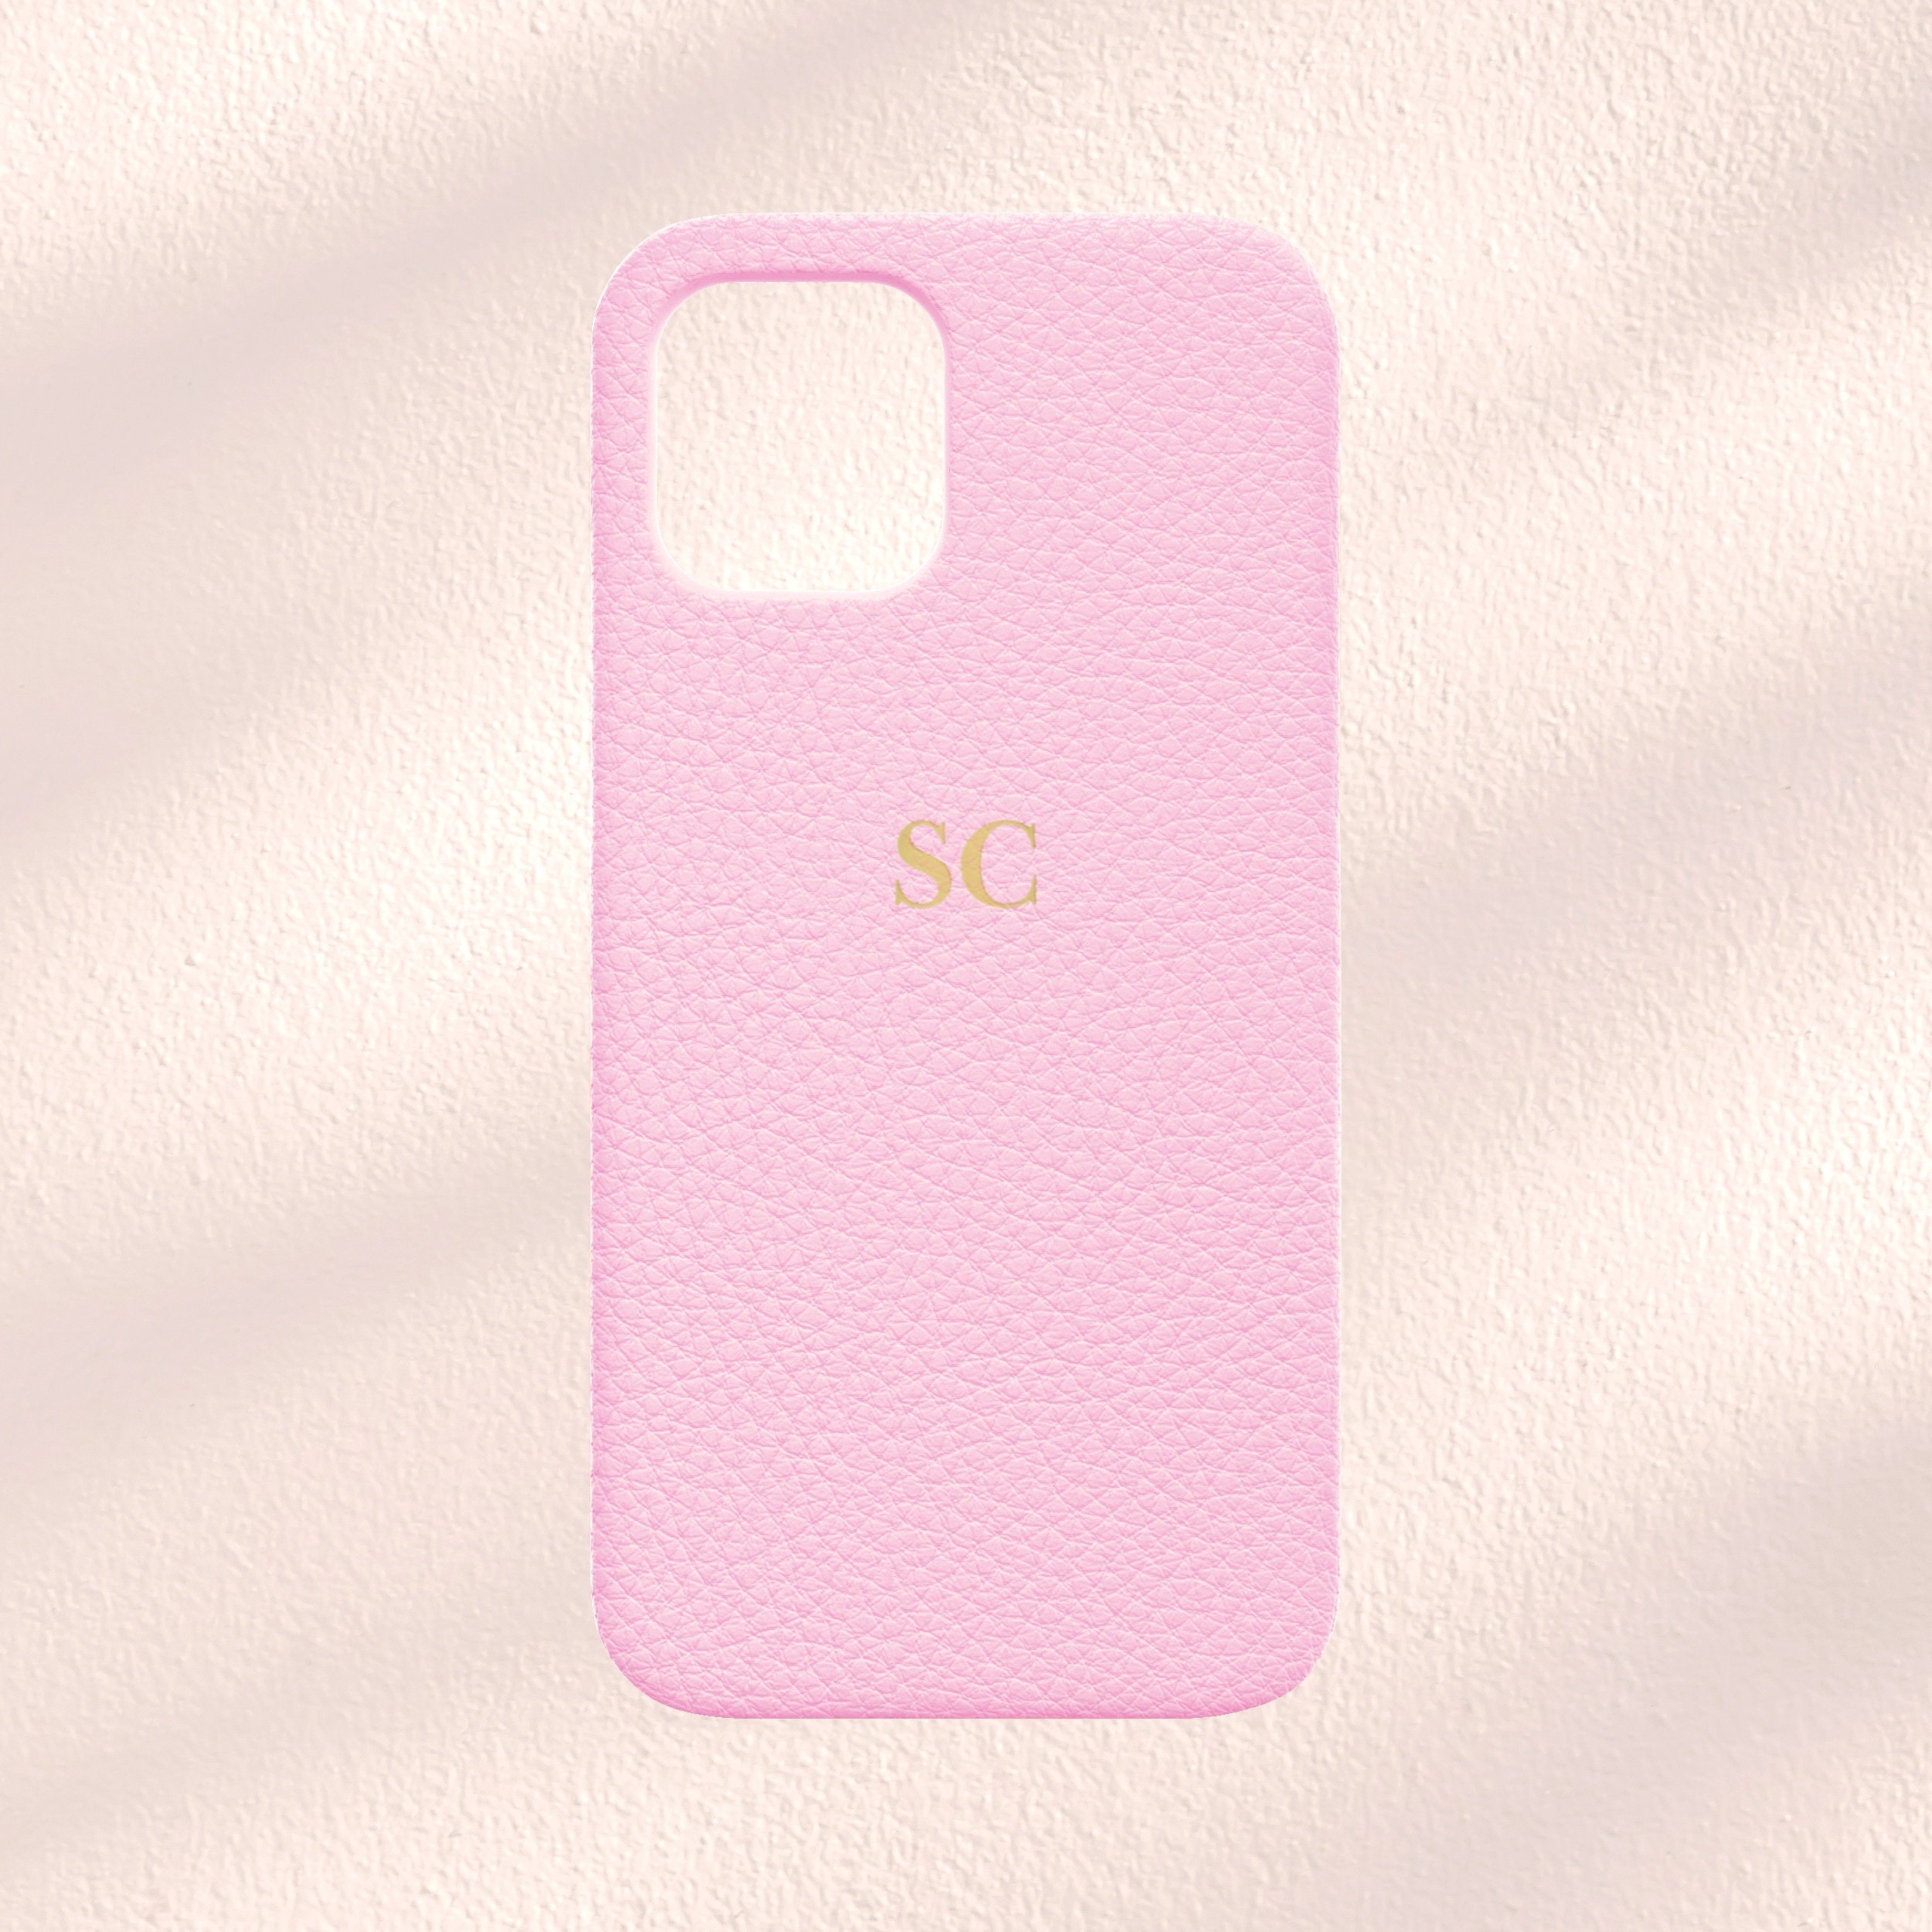 Pink Womens Accessories Phone cases Case Scenario pantone Universe Iphone5 Case in Candy Pink 